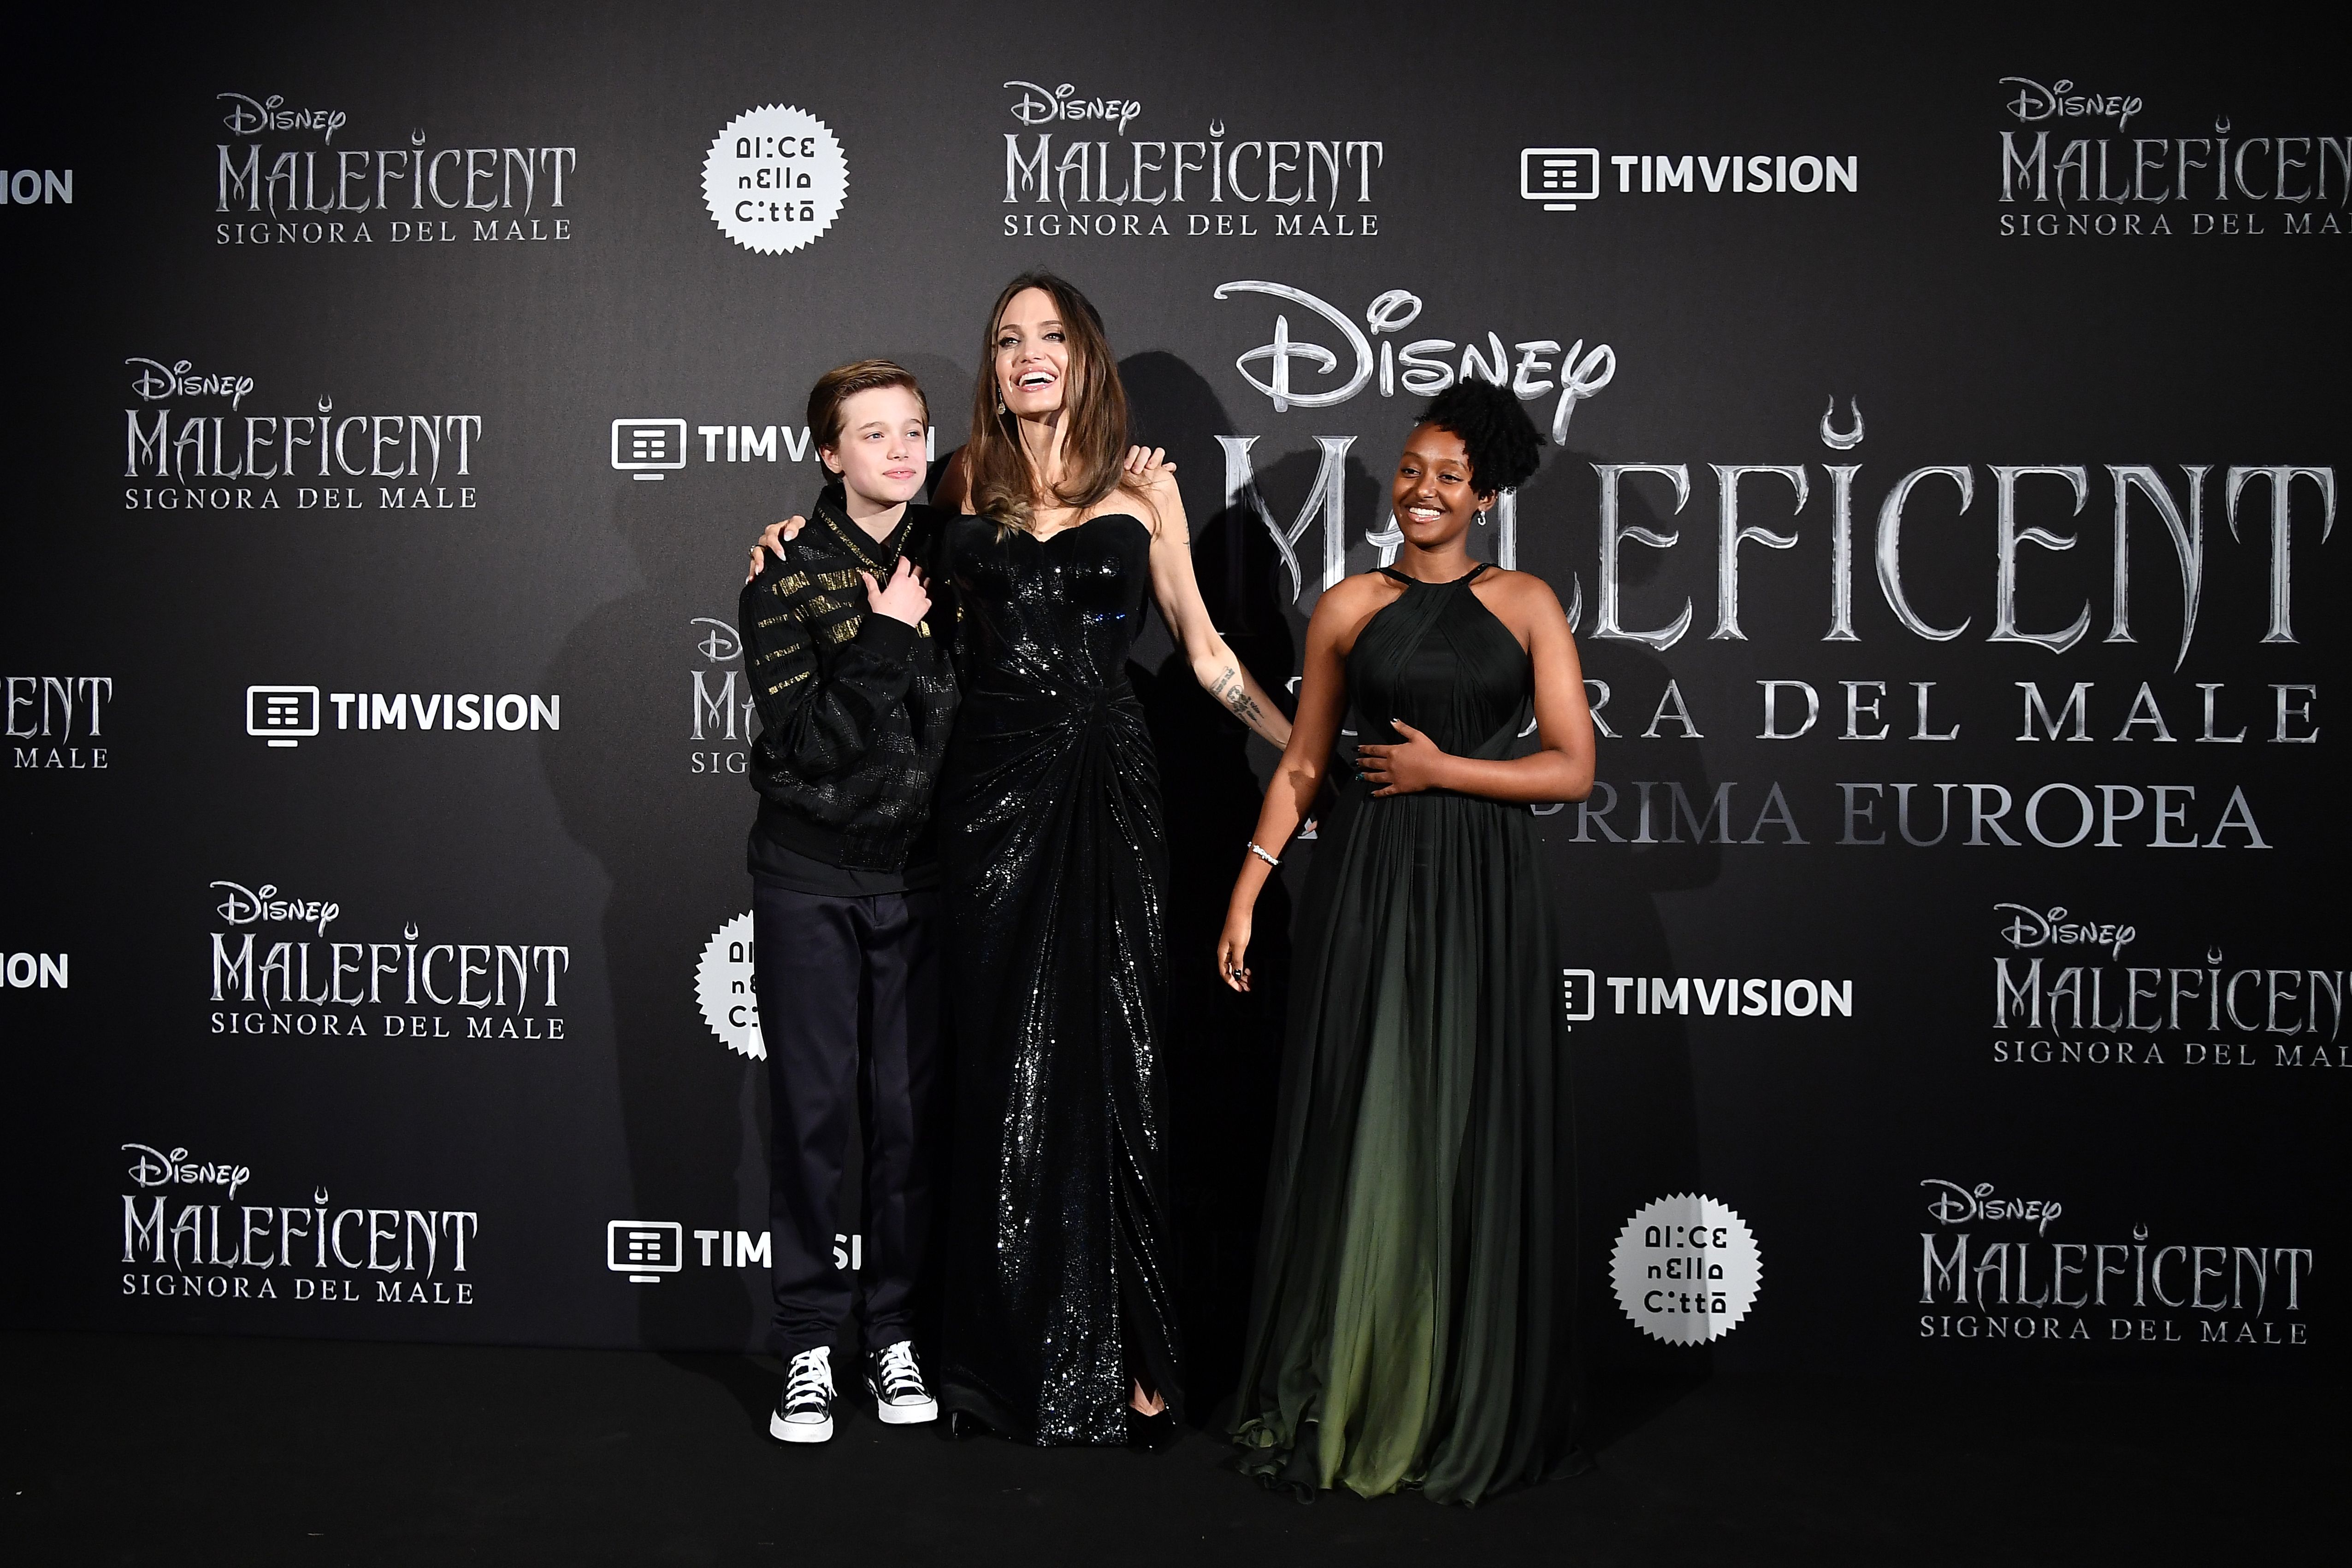 Shiloh Jolie-Pitt, Angelina Jolie, and Zahara Jolie-Pitt at the Rome premiere of "Maleficent' in 2019 | Source: Getty Images